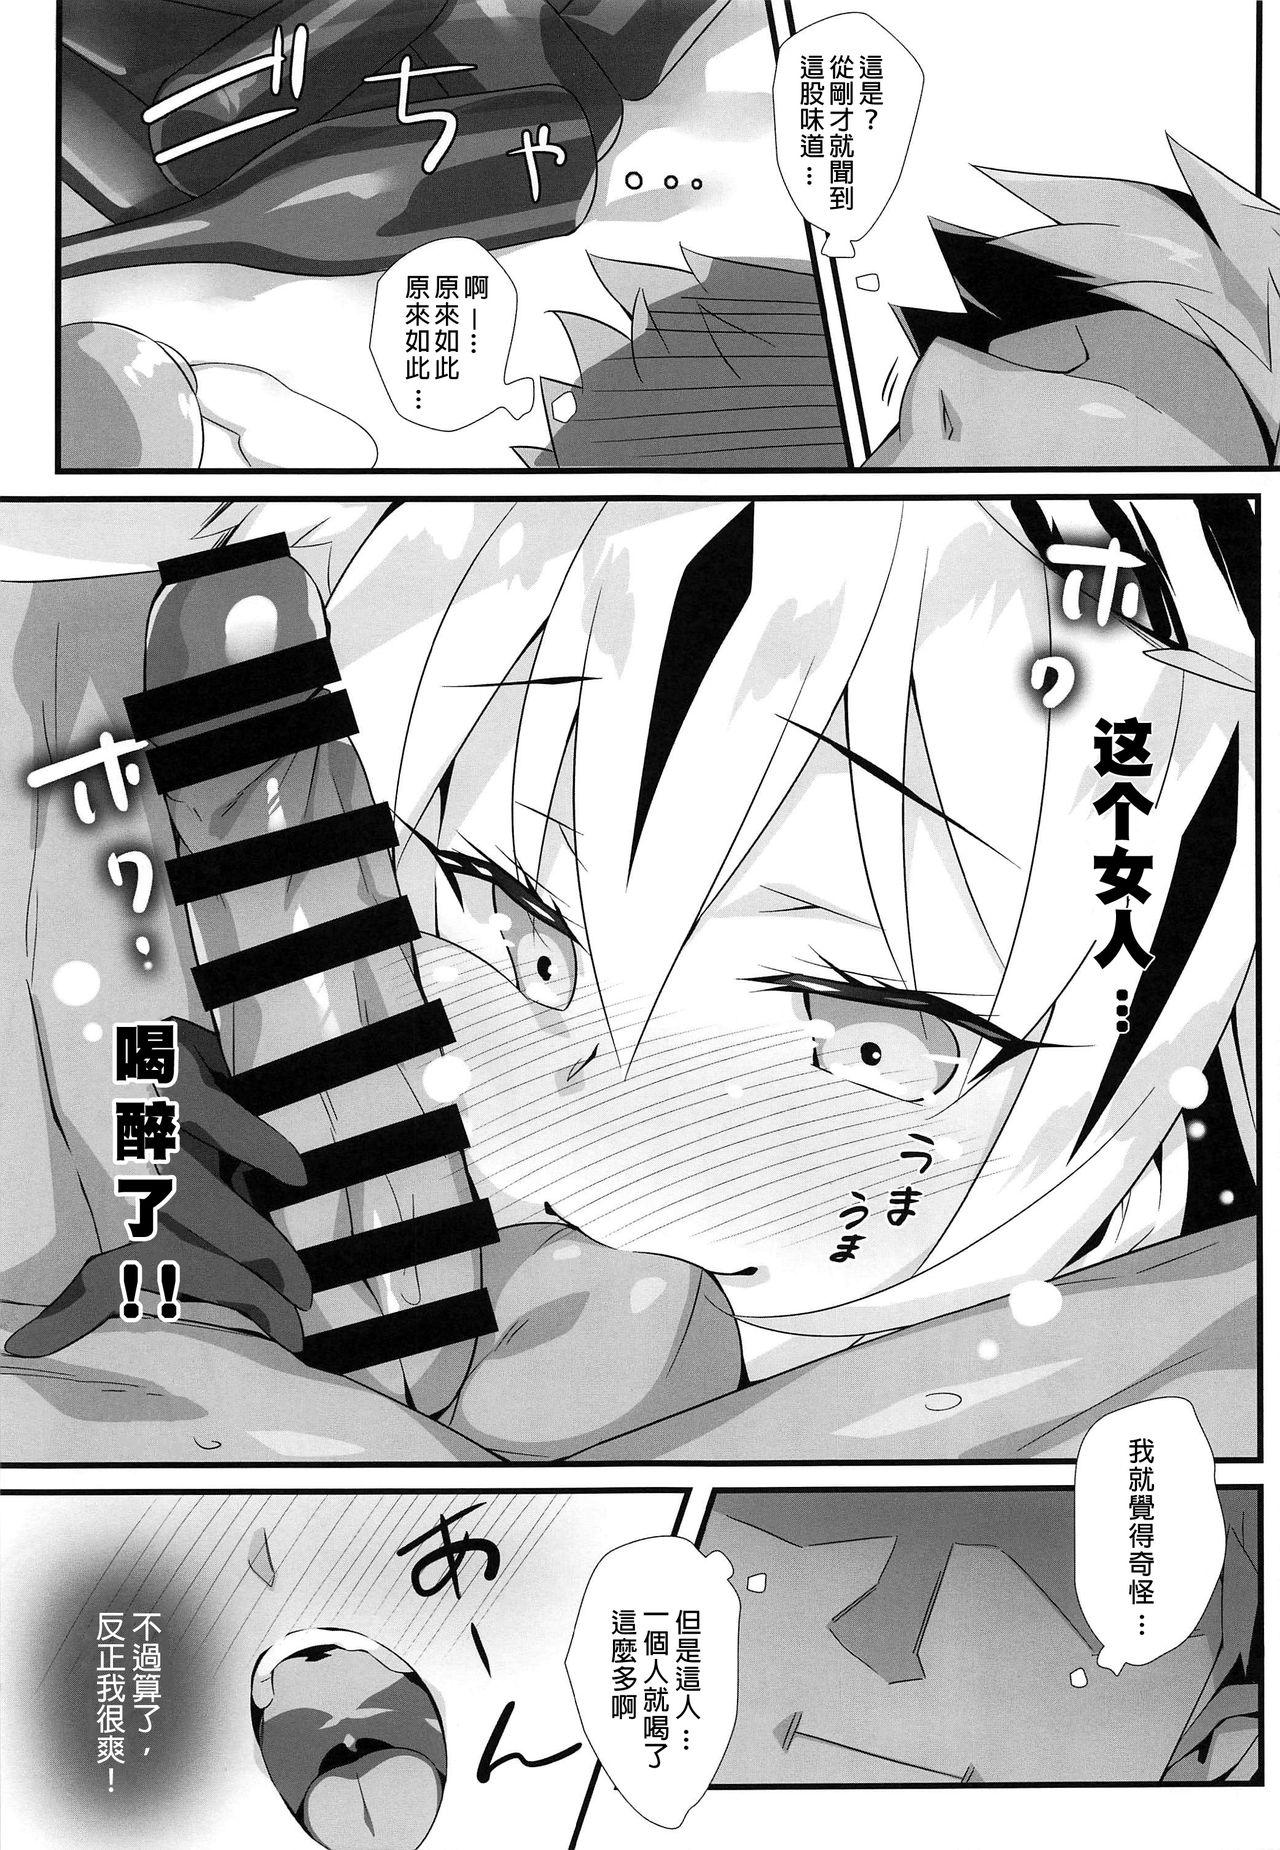 Ametur Porn Tora Emaki - Fate grand order Exposed - Page 9